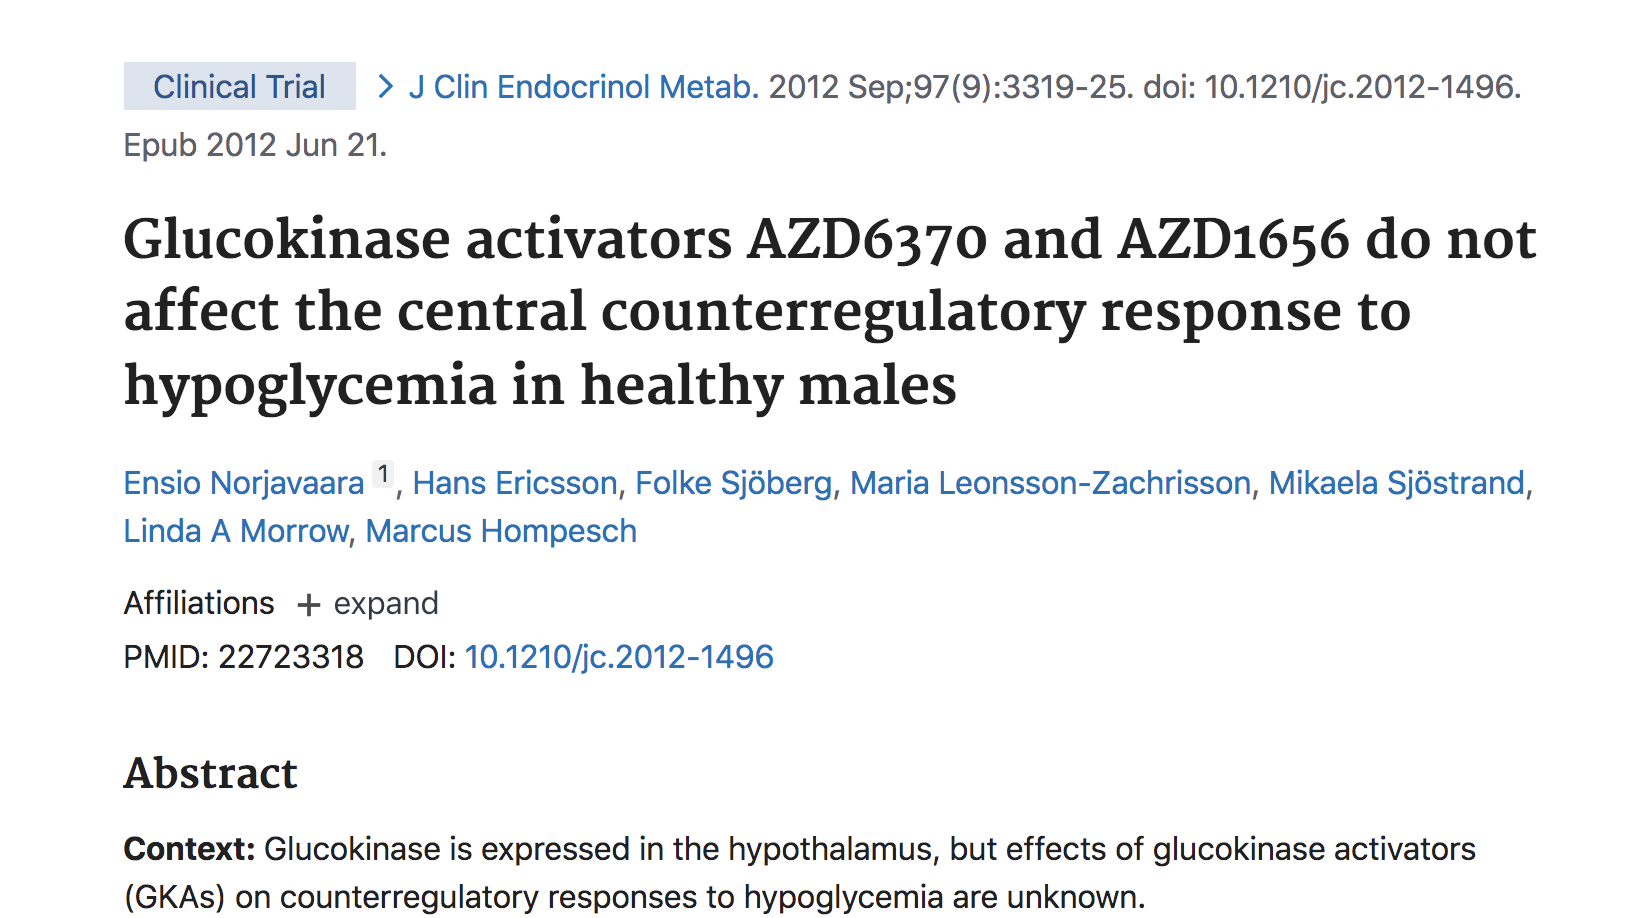 image of Glucokinase activators AZD6370 and AZD1656 do not affect the central counterregulatory response to hypoglycemia in healthy males.